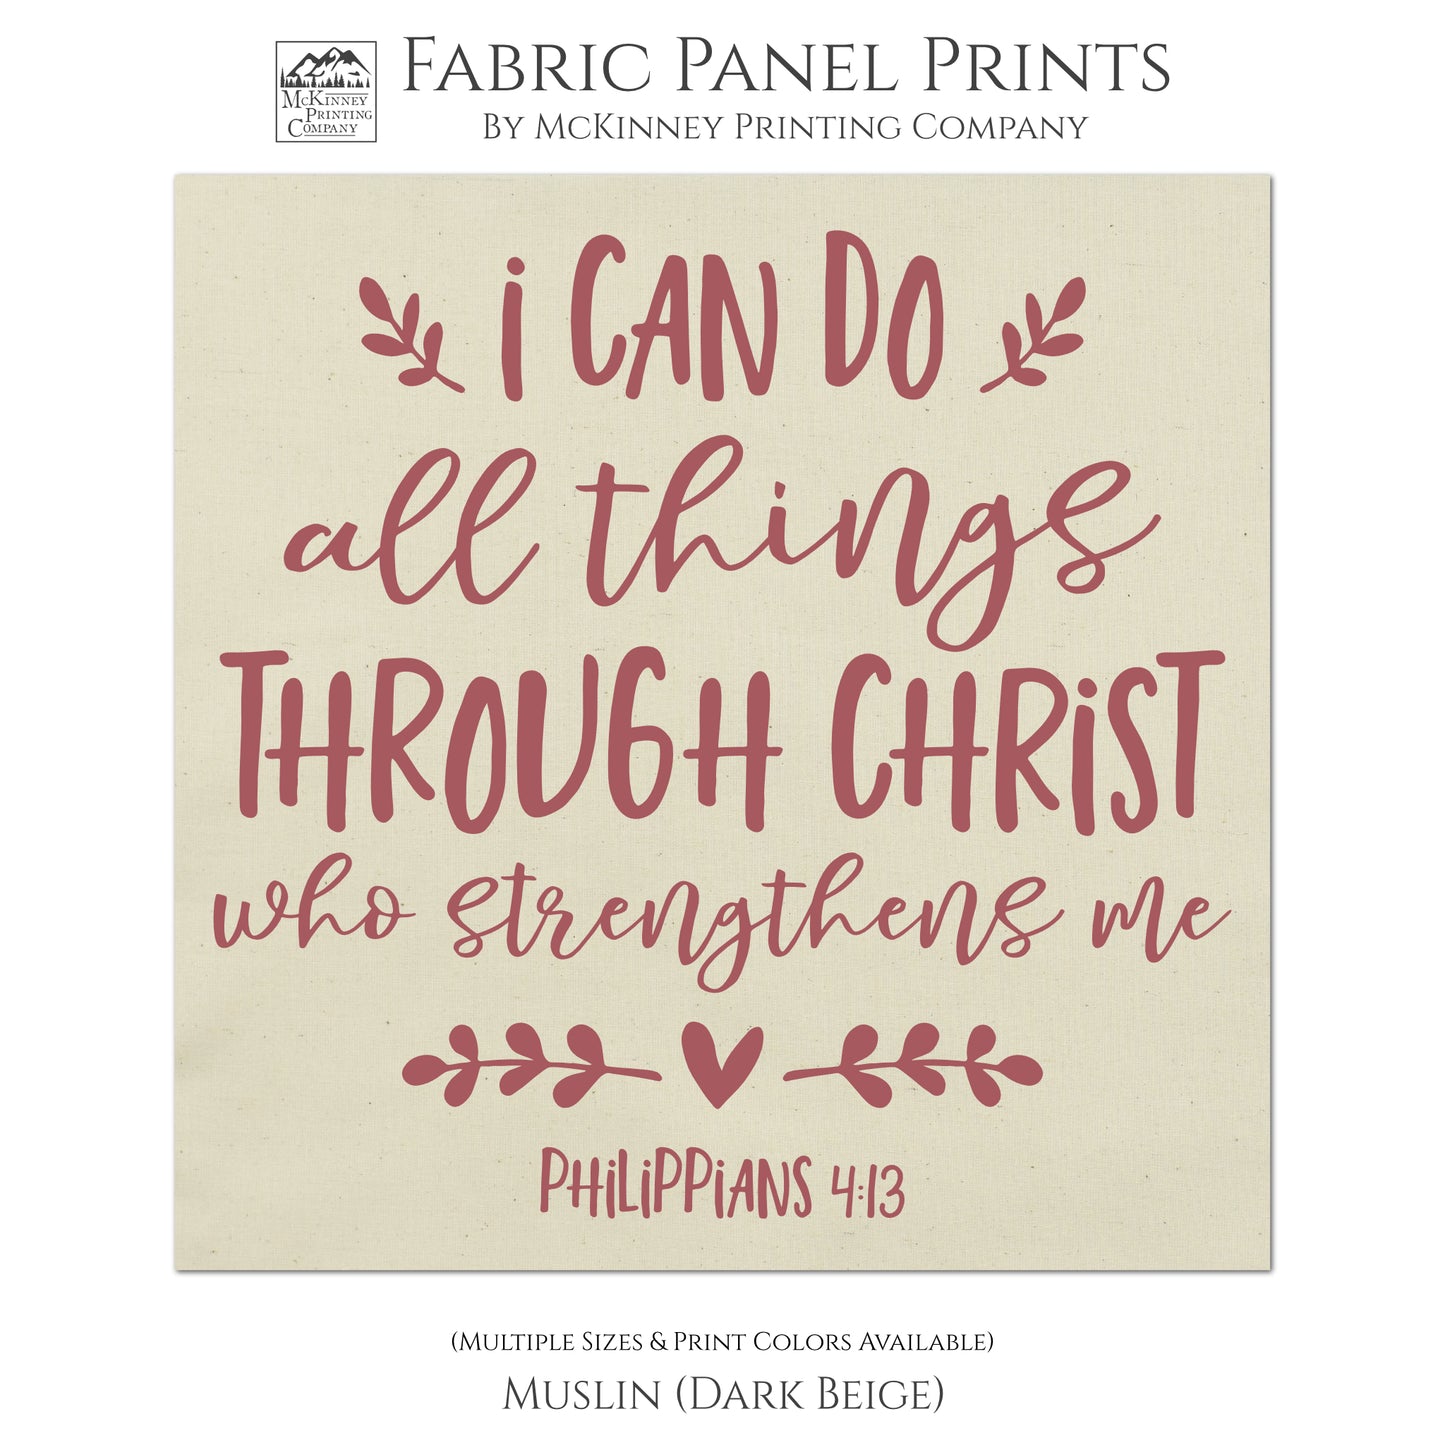 Philippians 4:13 - I can do all things through Christ who strengthens me. Quilt Block, Fabric Panel Print - Muslin